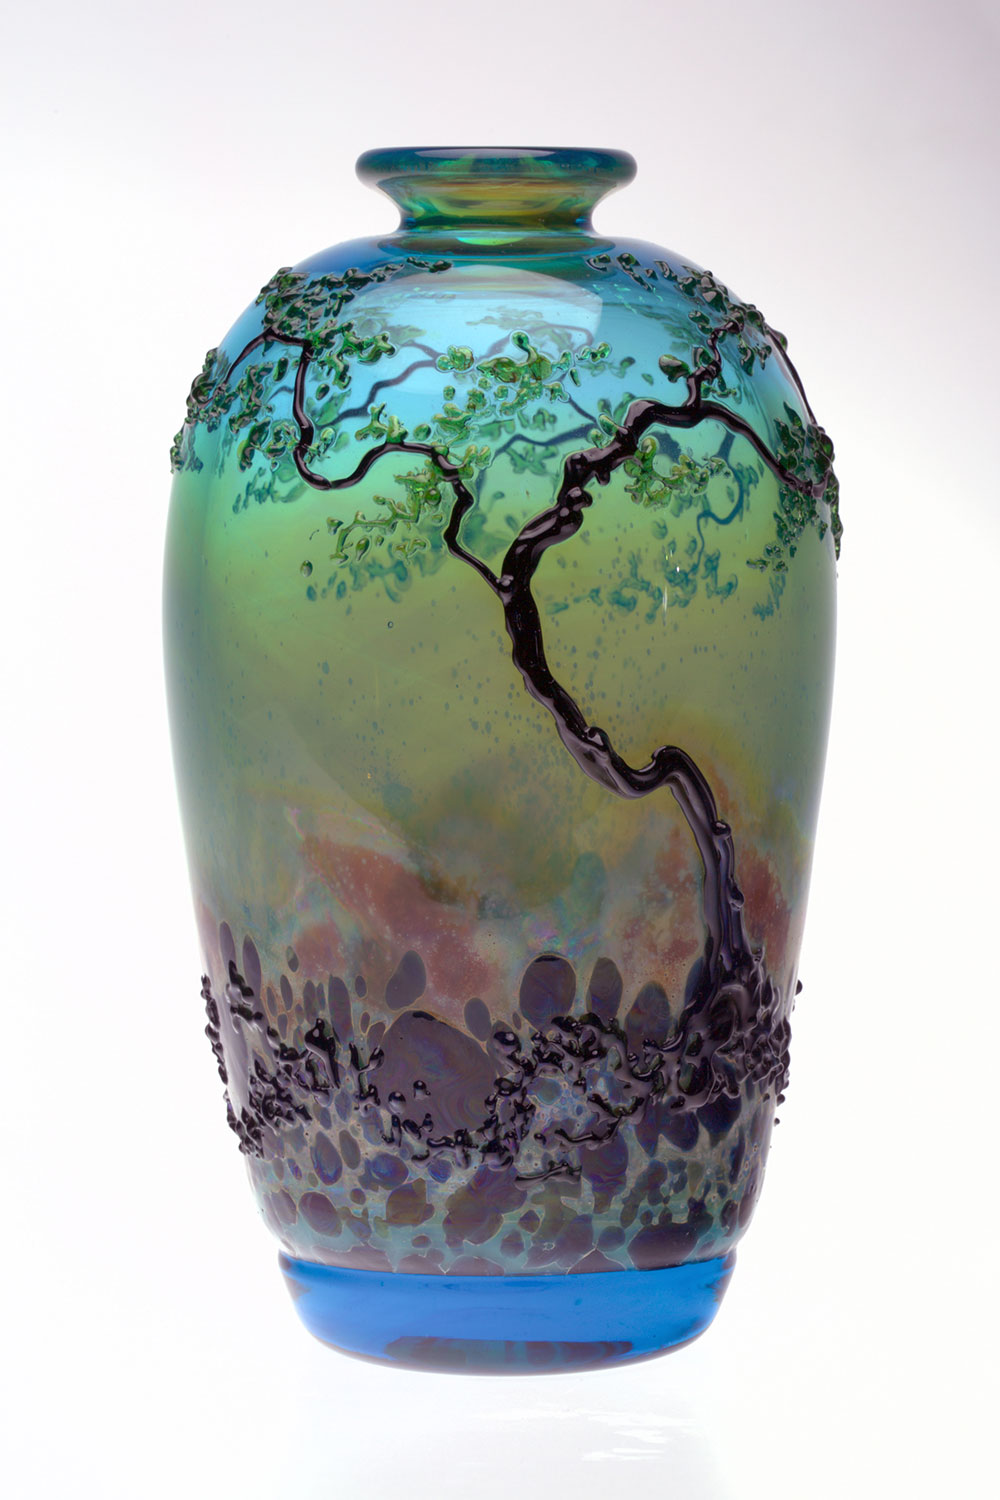 Glass vase with a protruding tree design